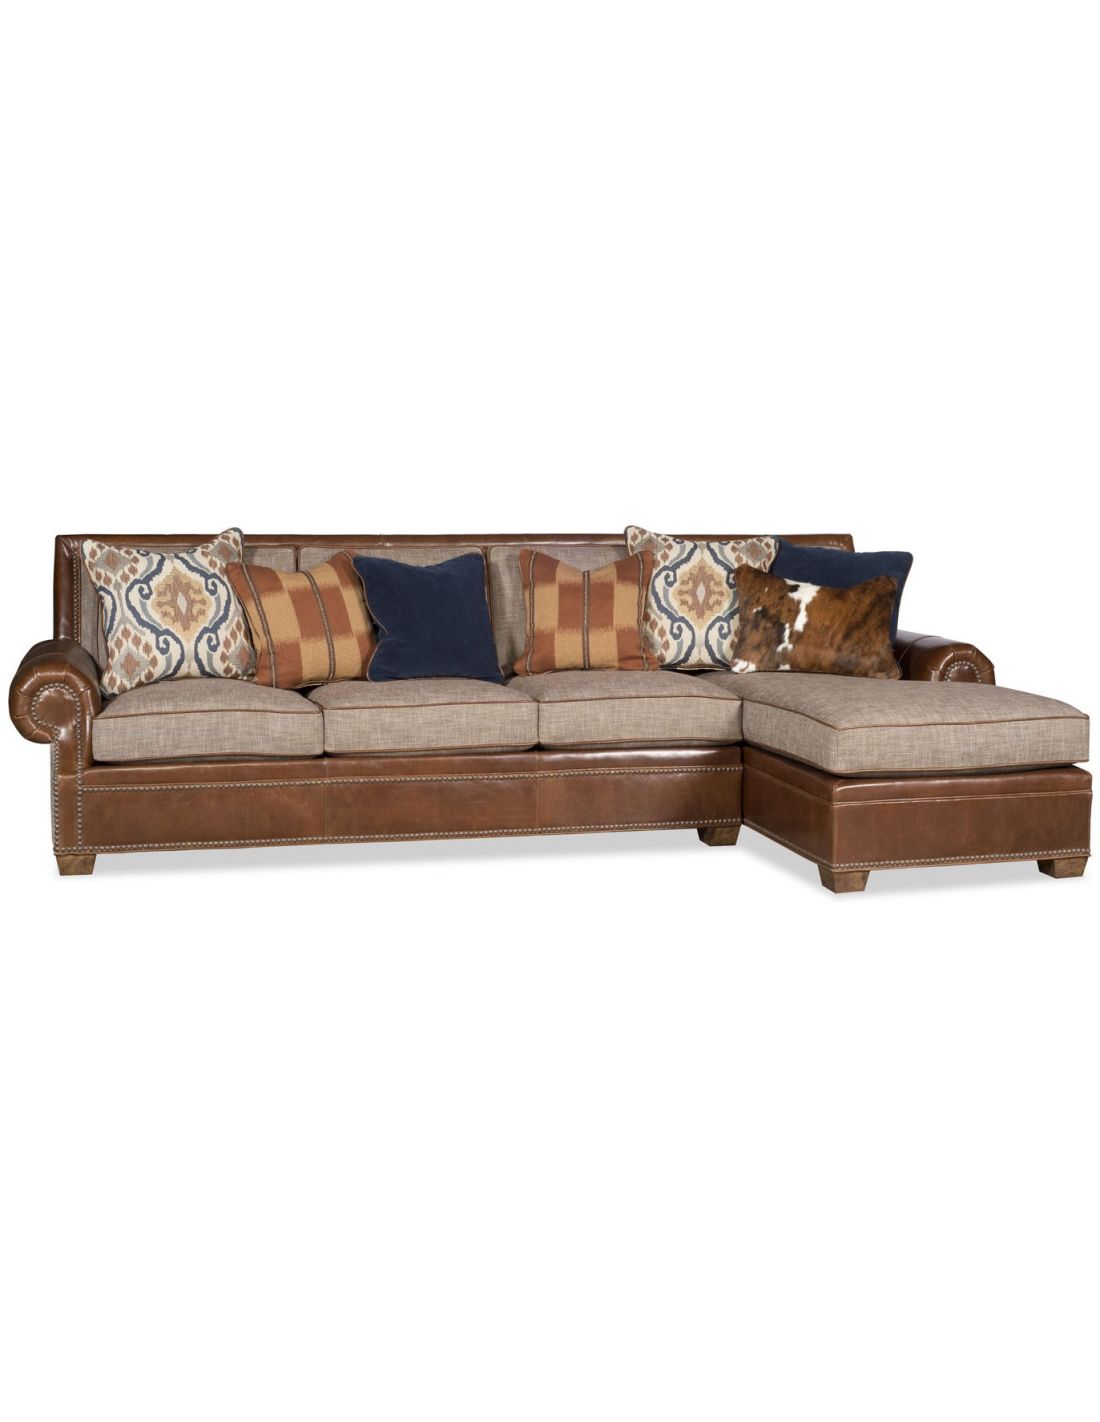 Sectional Sofa Covered In A Combination, Couch With Leather And Fabric